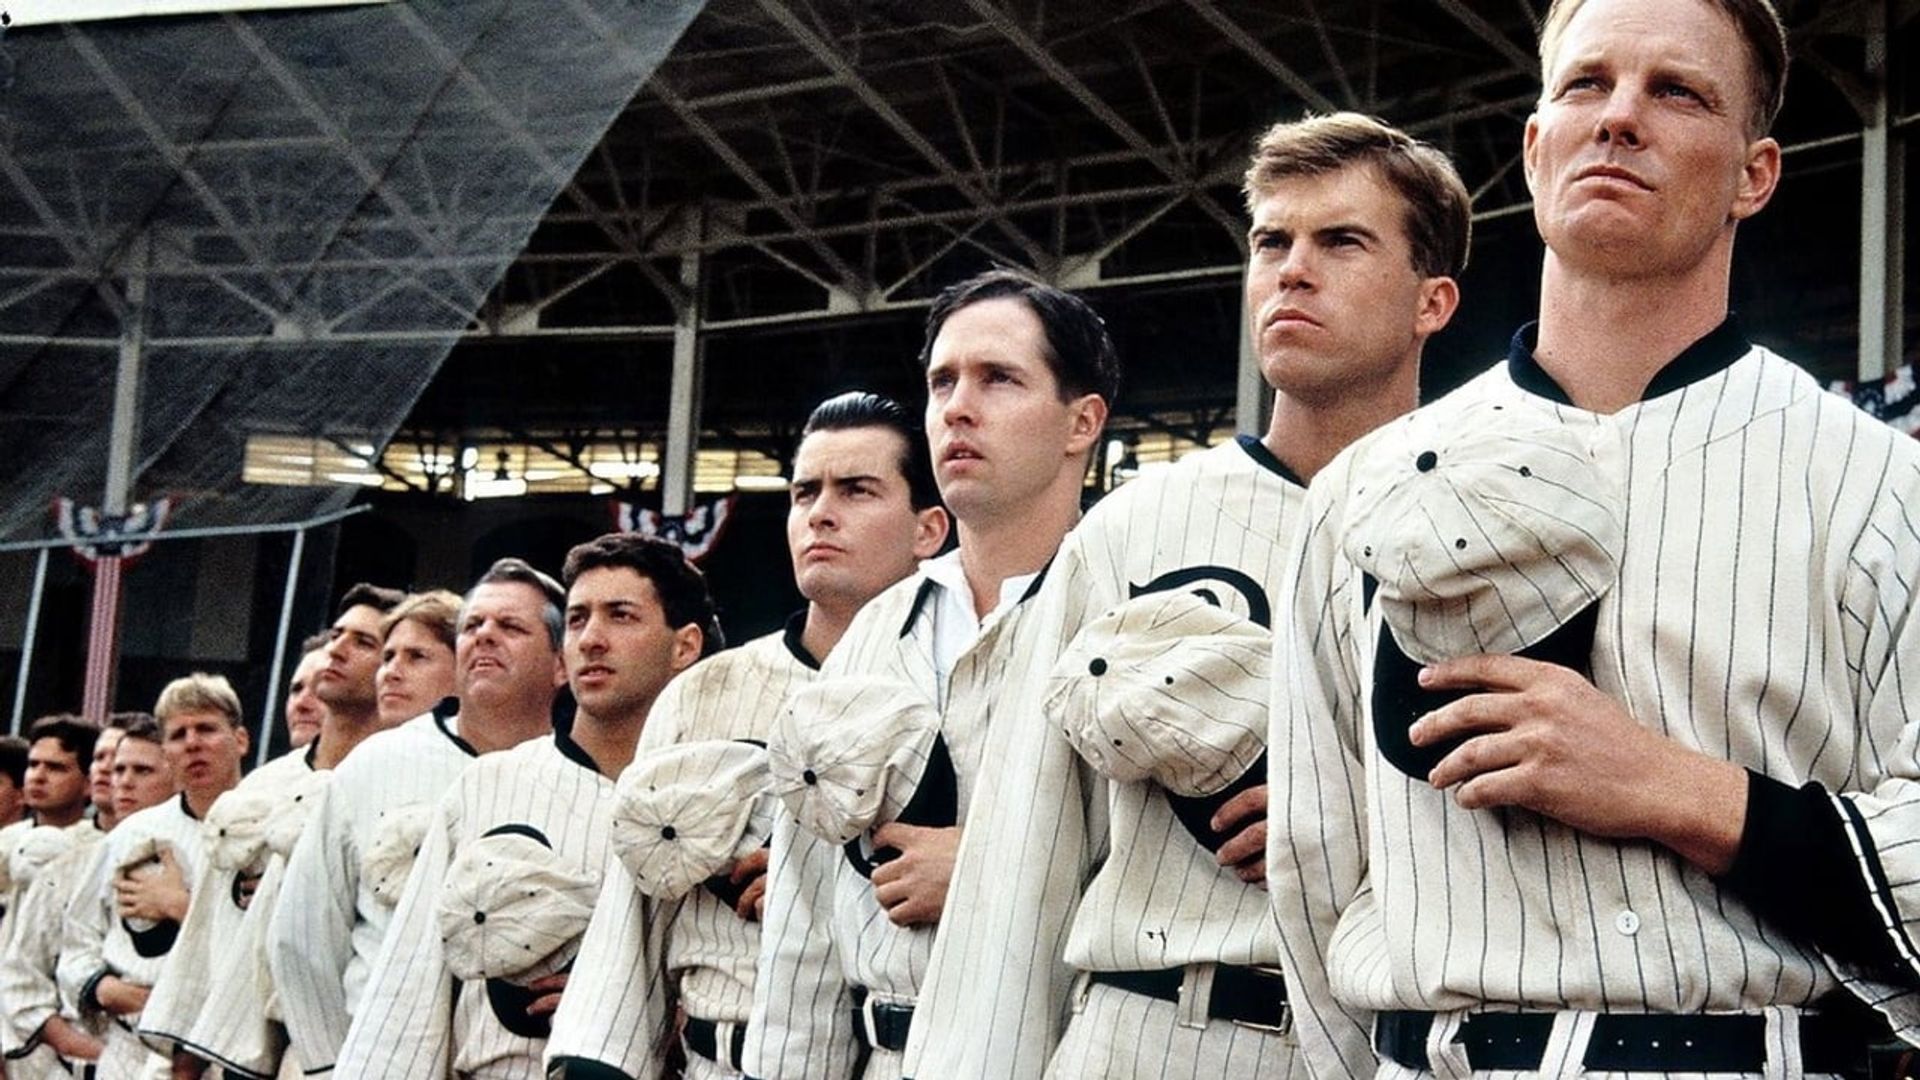 Eight Men Out background